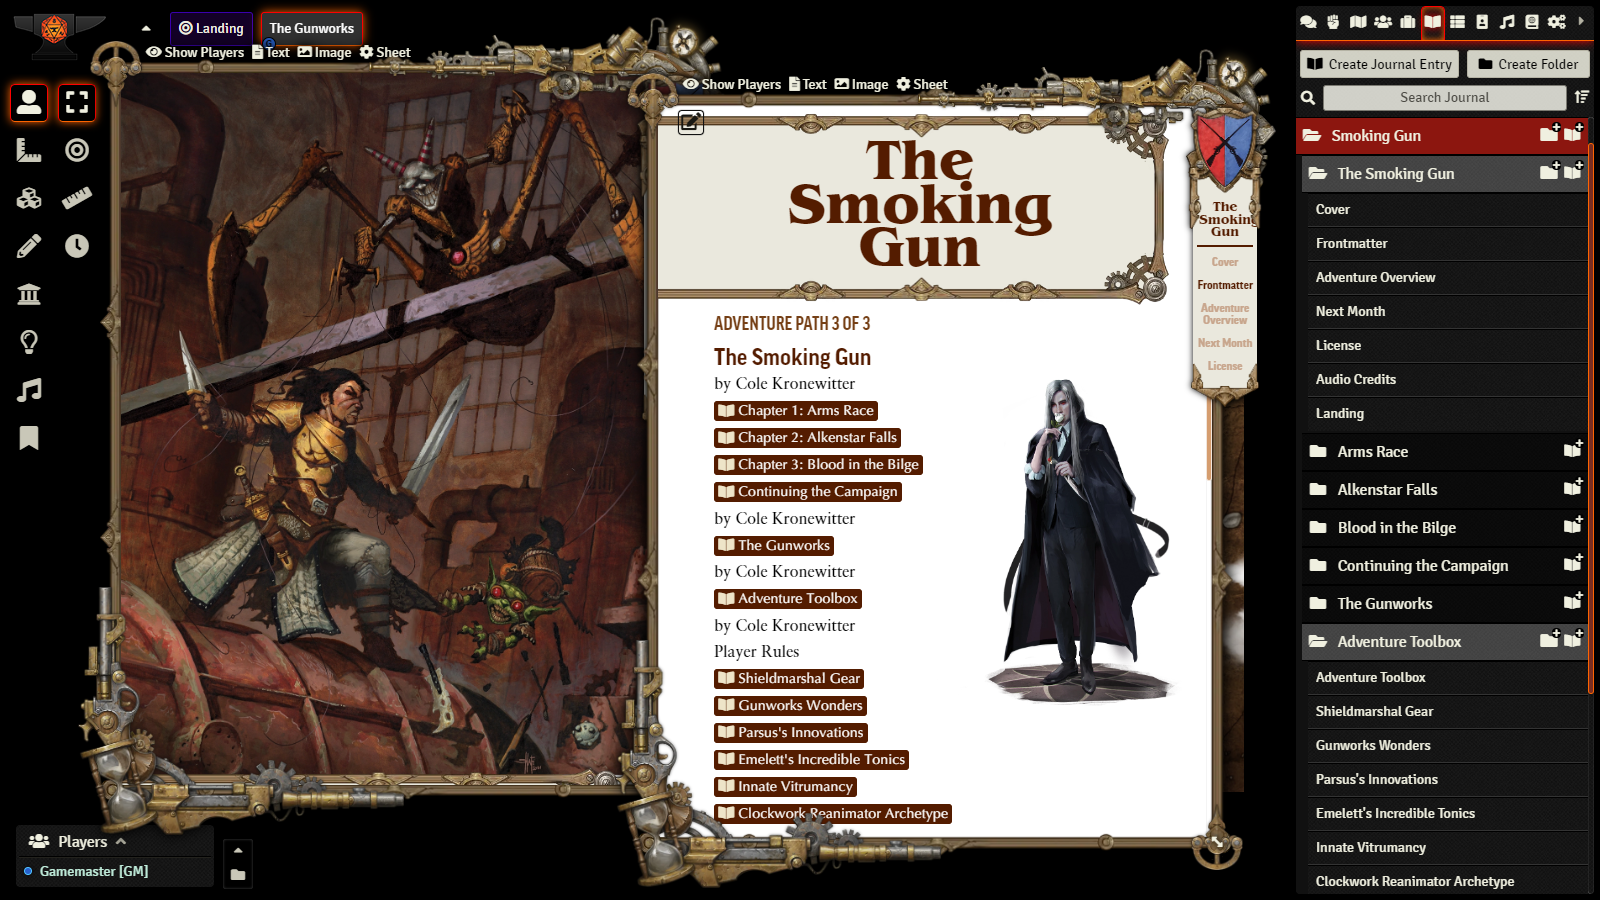 A journal entry shows an image of Valeros, the iconic fighter, and Fumbus, the iconic alchemist, sliding down the side of a huge rusted tank while a strange clockwork spider-like creature lurks in the rafters above. To the right, the title 'The Smoking Gun' appears above a table of contents.